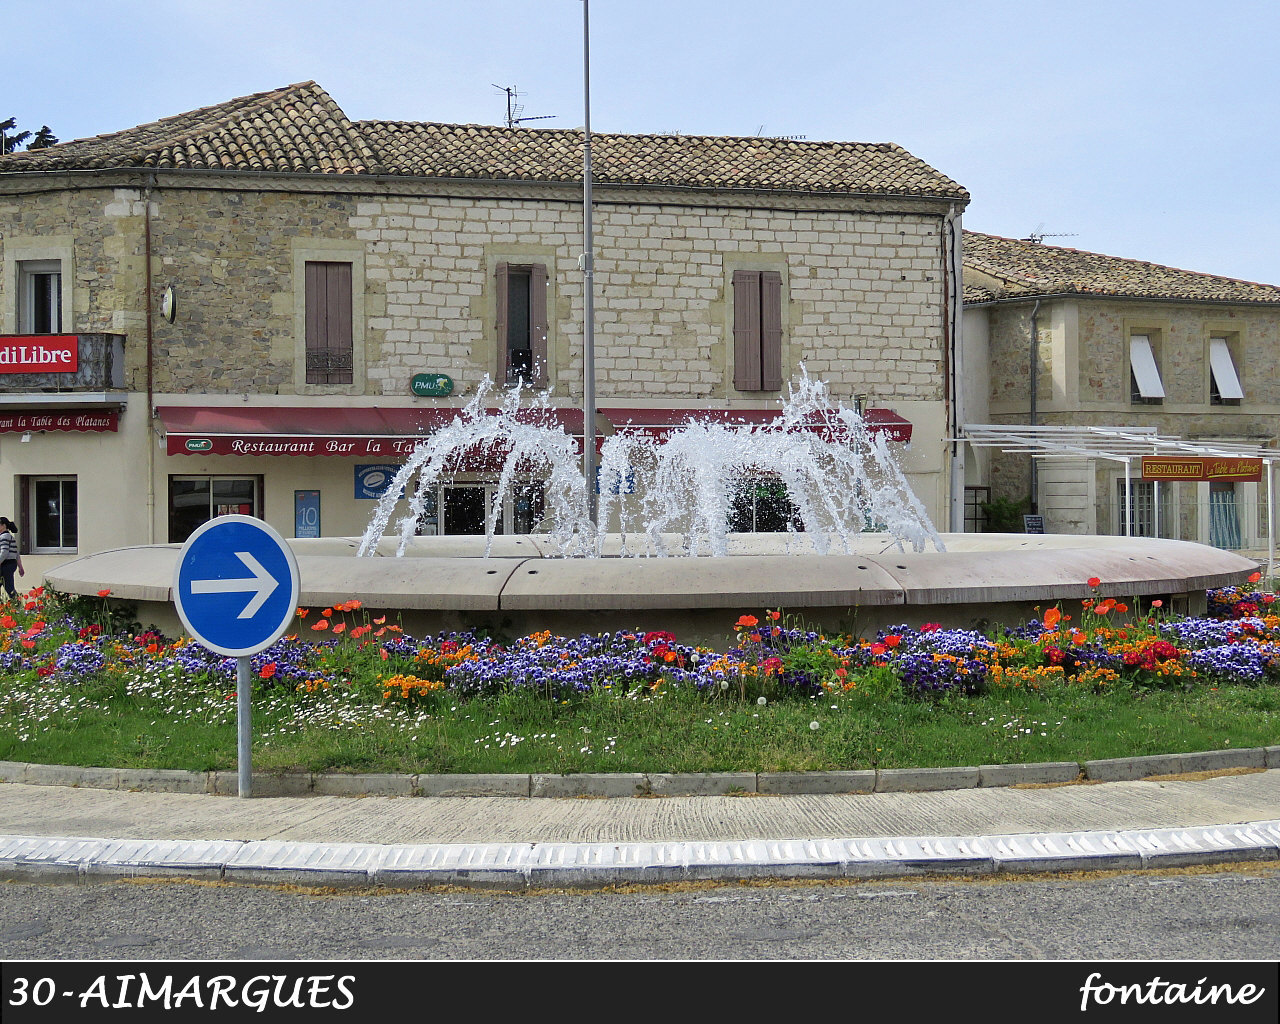 30AIMARGUES_fontaine_110.jpg